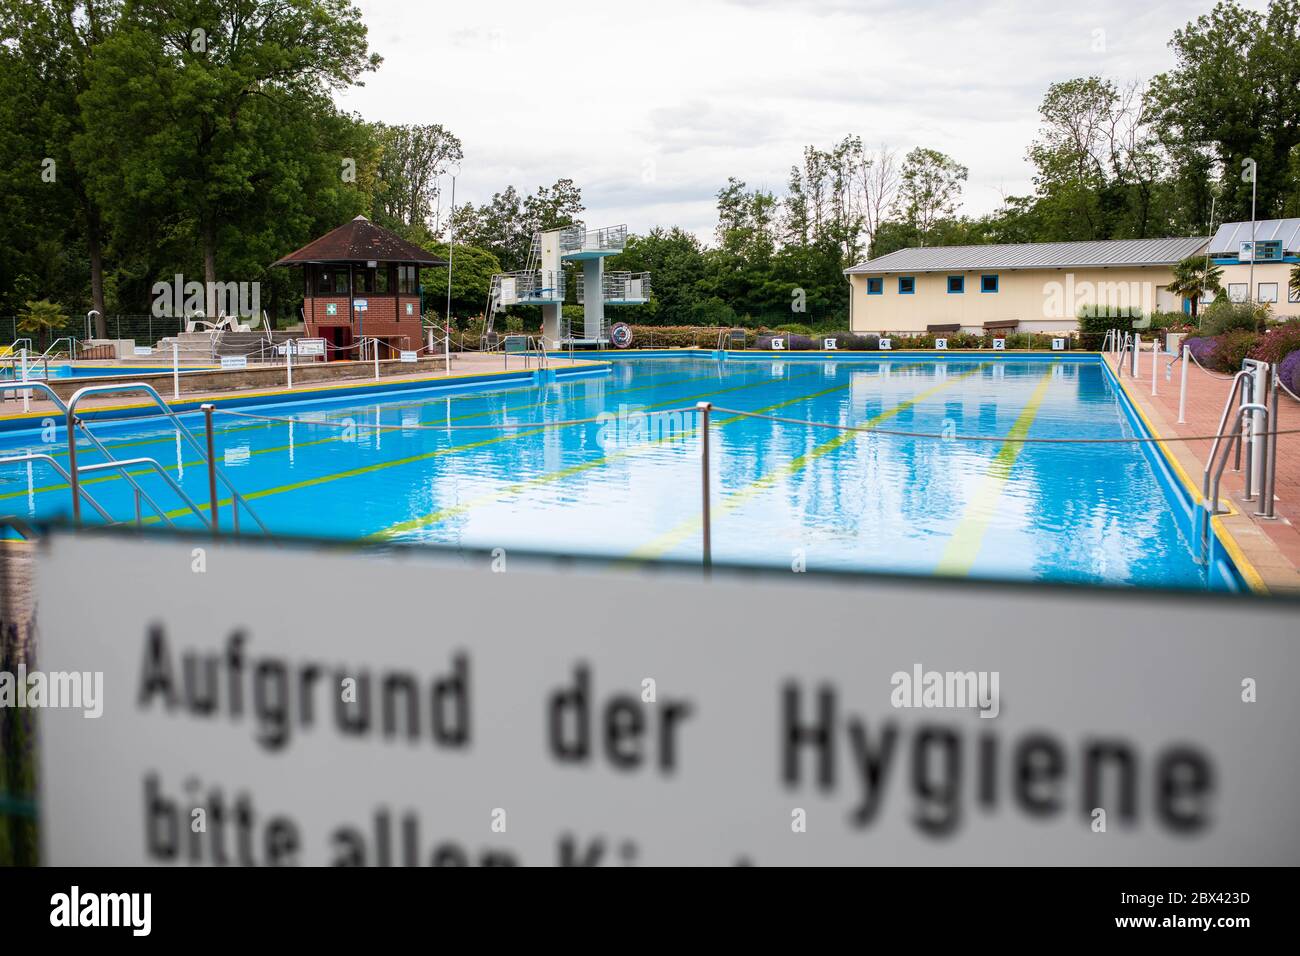 Breisach Am Rhein, Germany. 04th June, 2020. The pool and sunbathing areas of the forest swimming pool are deserted. Many outdoor pools in Baden-Württemberg are preparing for the opening after the start of the season, which was delayed by the Corona pandemic. However, some pools will not open this year due to financial reasons or health concerns. Credit: Philipp von Ditfurth/dpa/Alamy Live News Stock Photo